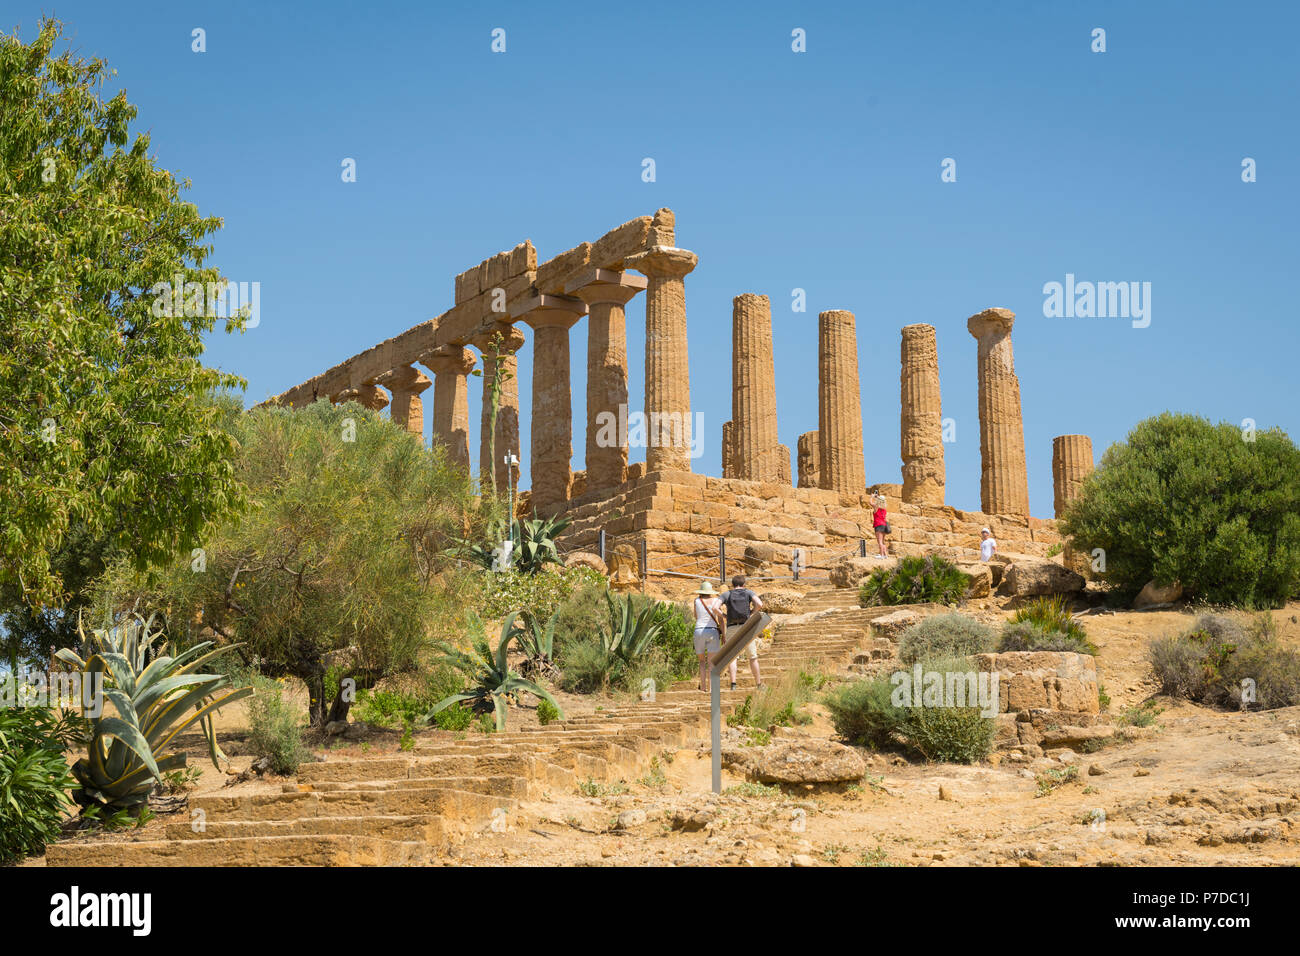 Italy Sicily Agrigento Valle dei Templi Valley of the Temples built 450 BC by colonists from Gela Temple of Hera Lacinia 5th century BCE steps trees Stock Photo